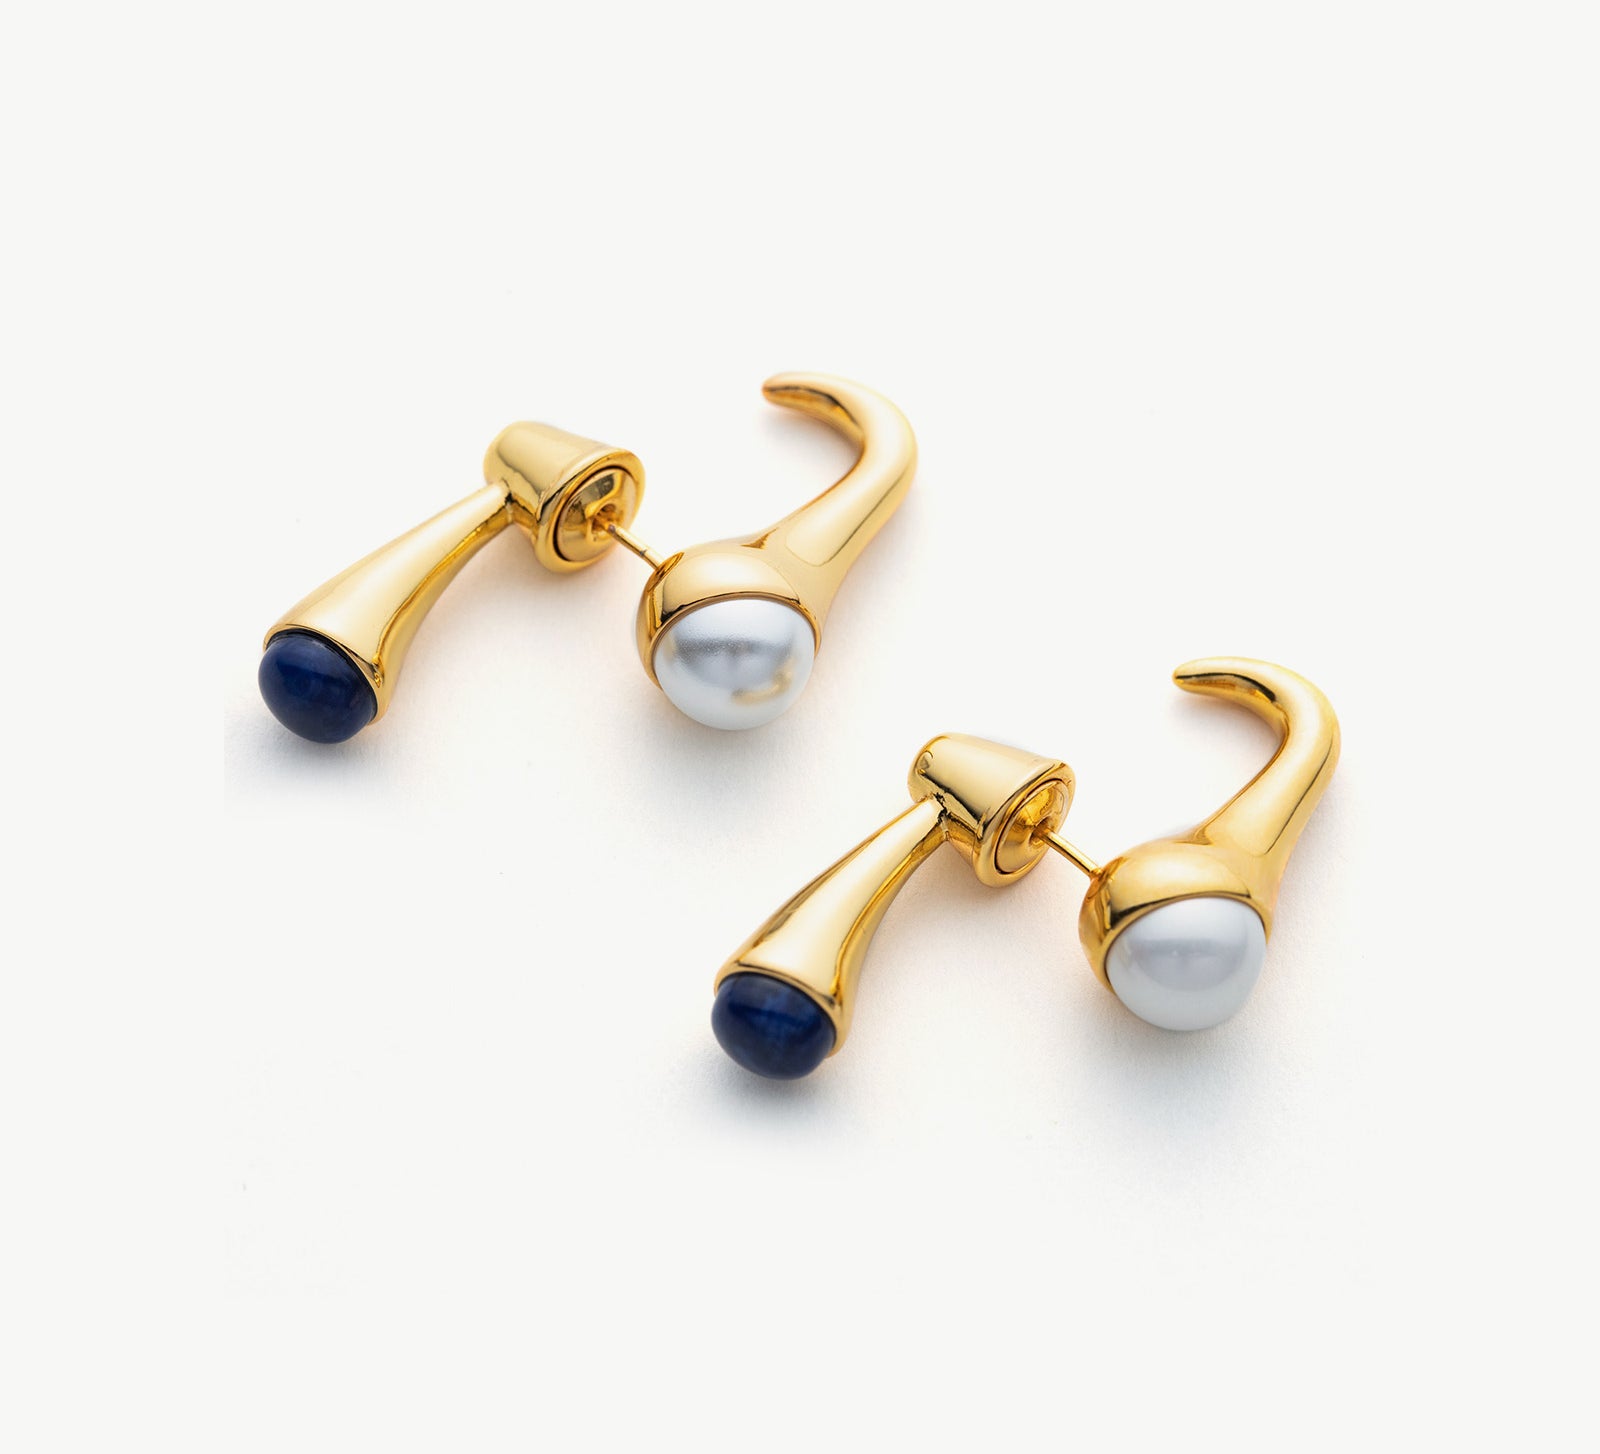 Pearl Crossover Hoop Earrings, a chic and stylish choice that showcases an embrace of pearls in a trendy crossover pattern for a fashionable look